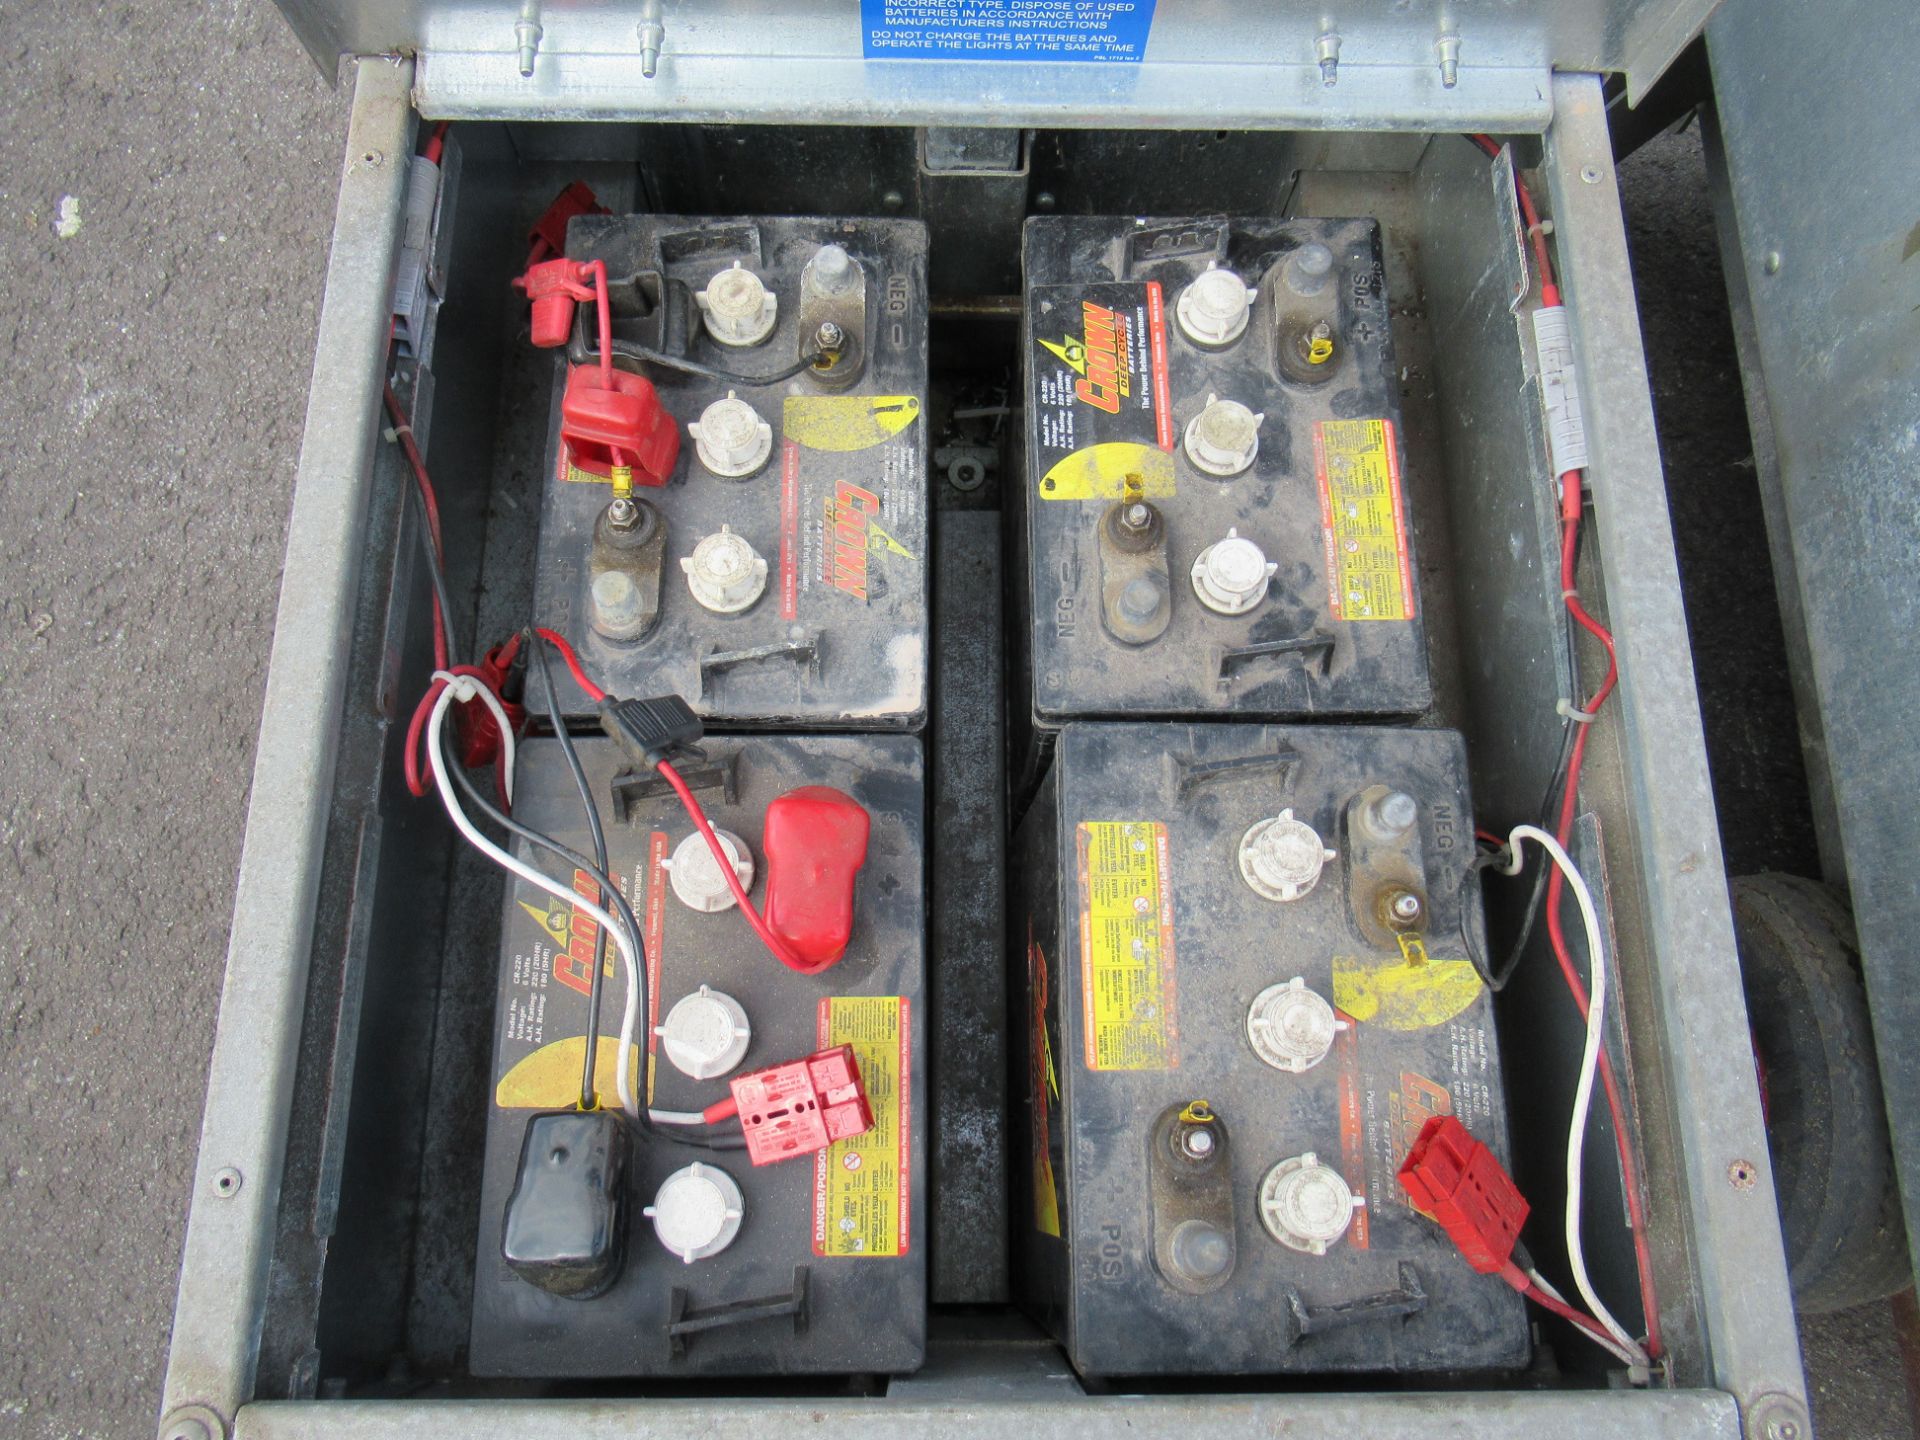 A Pair of Pike Signals Ltd "Vehicle" Battery Powered Portable Traffic Light Units - Image 7 of 7